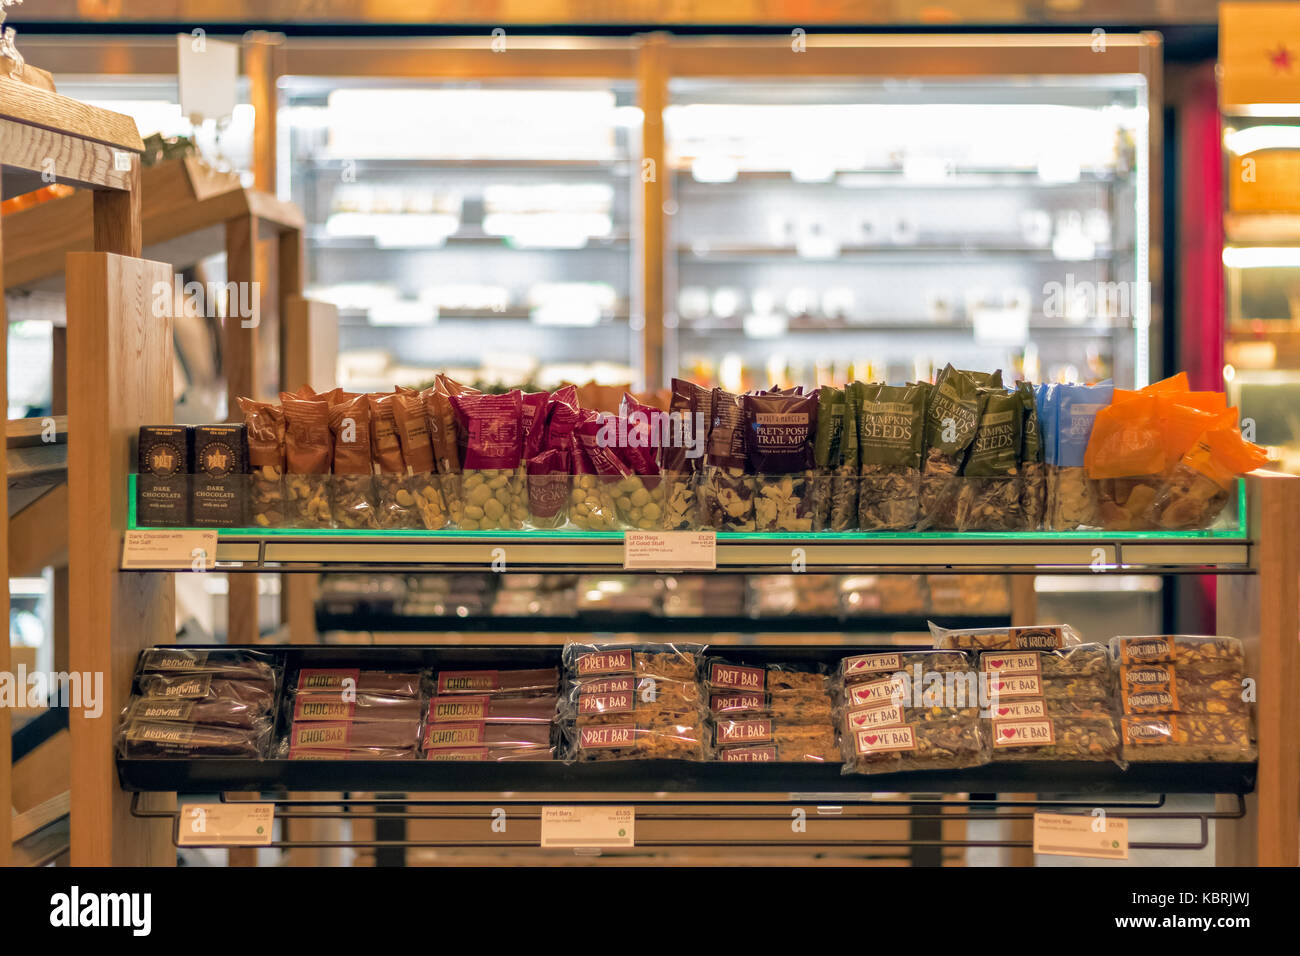 London, UK - September 30, 2017 - Nuts and energy bars displayed on shelves in Pret A Manger, an UK coffee and sandwich shop Stock Photo